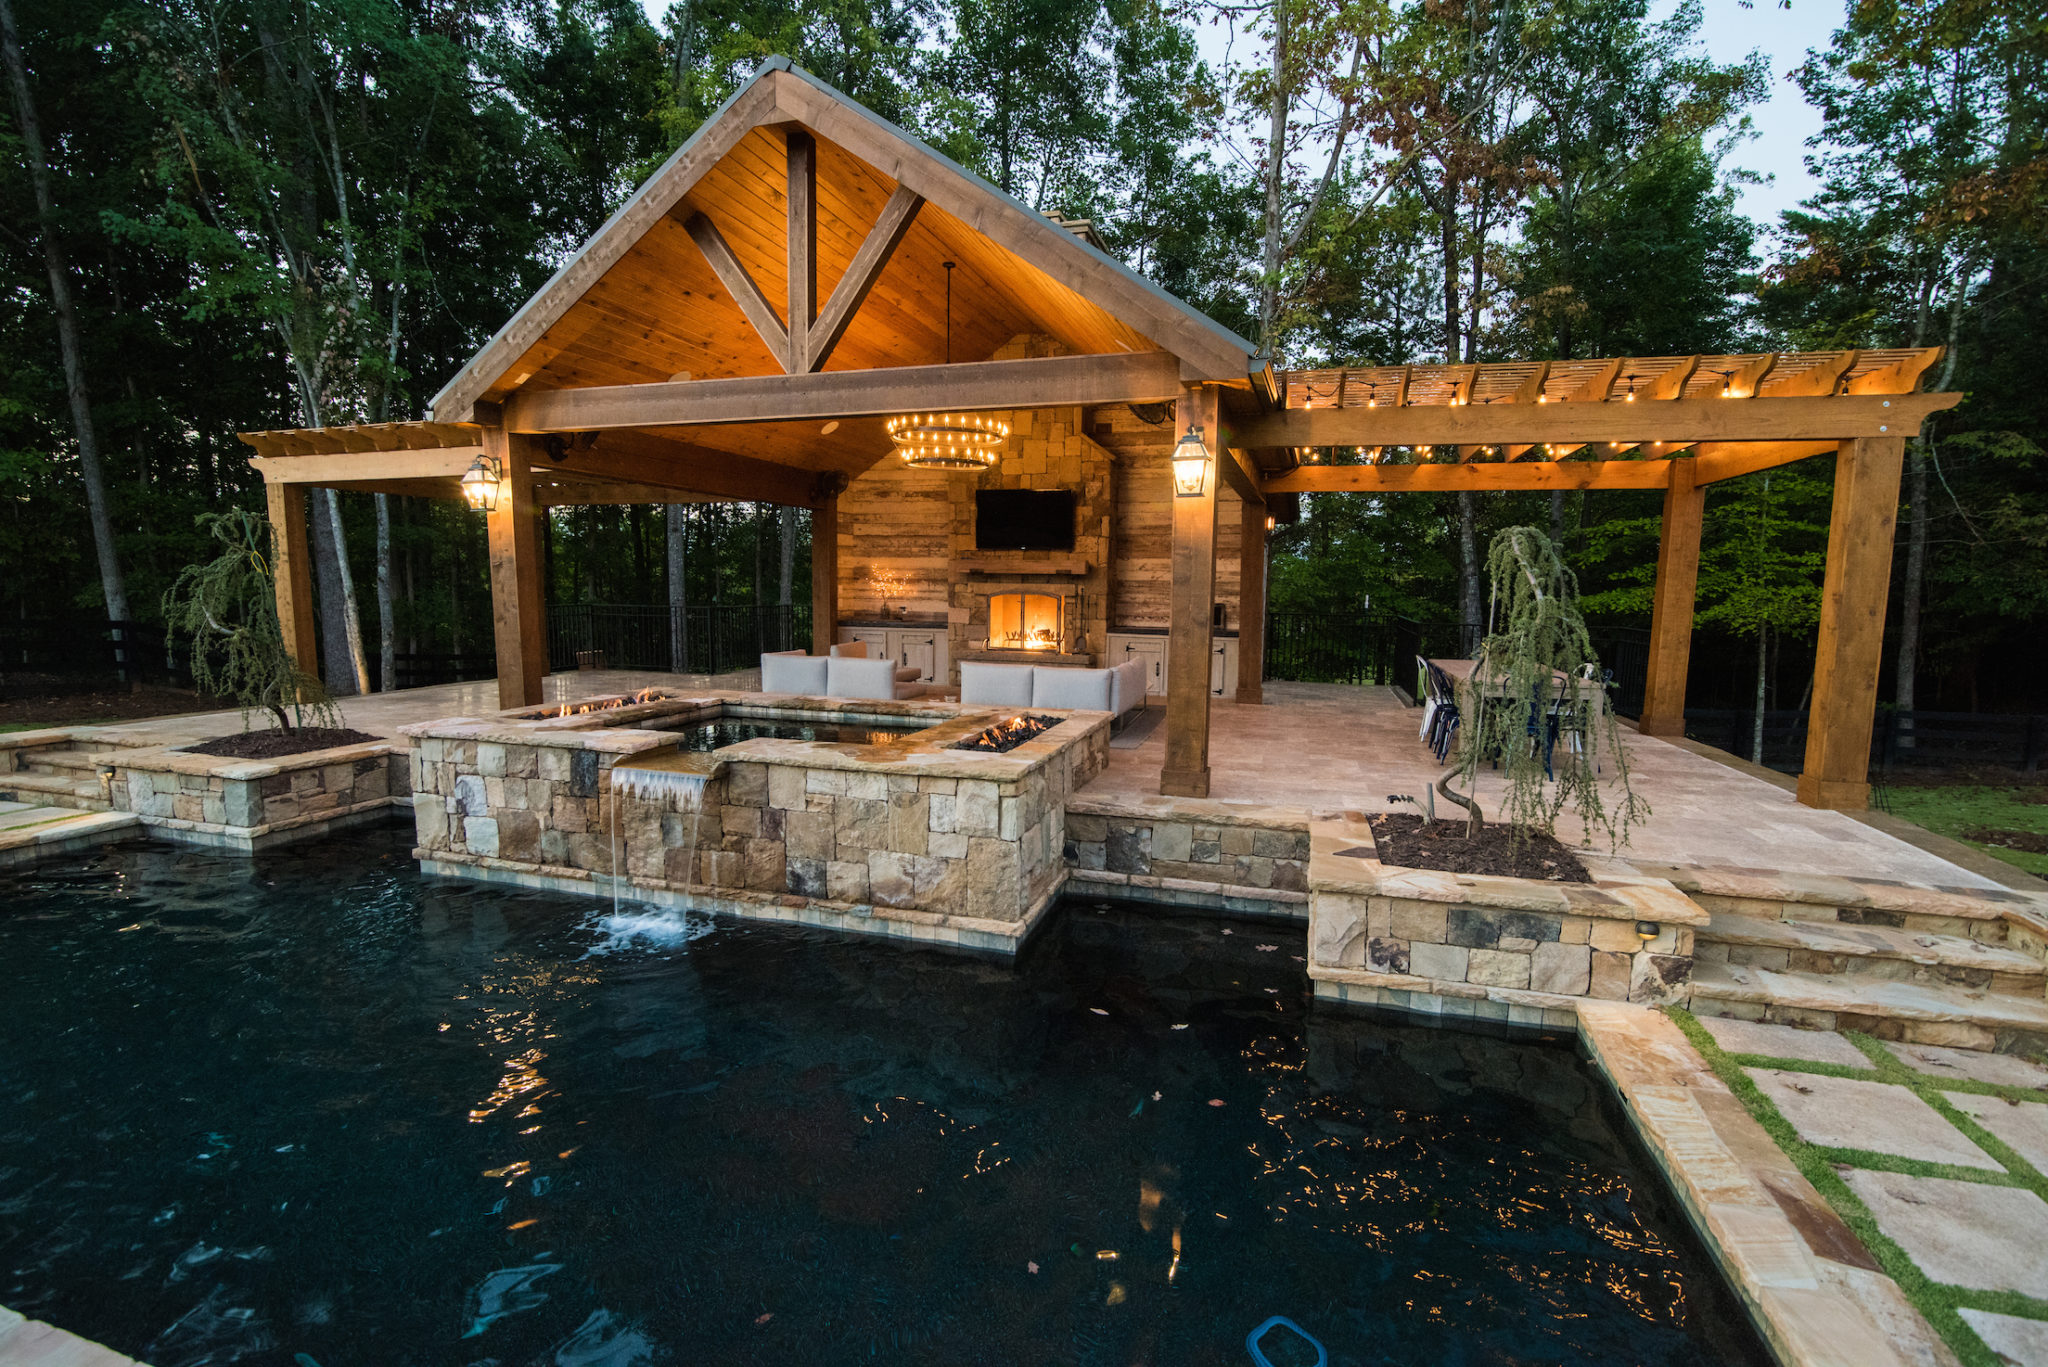 A luxurious poolside cabana with pergolas on each side, showcasing an outdoor kitchen.